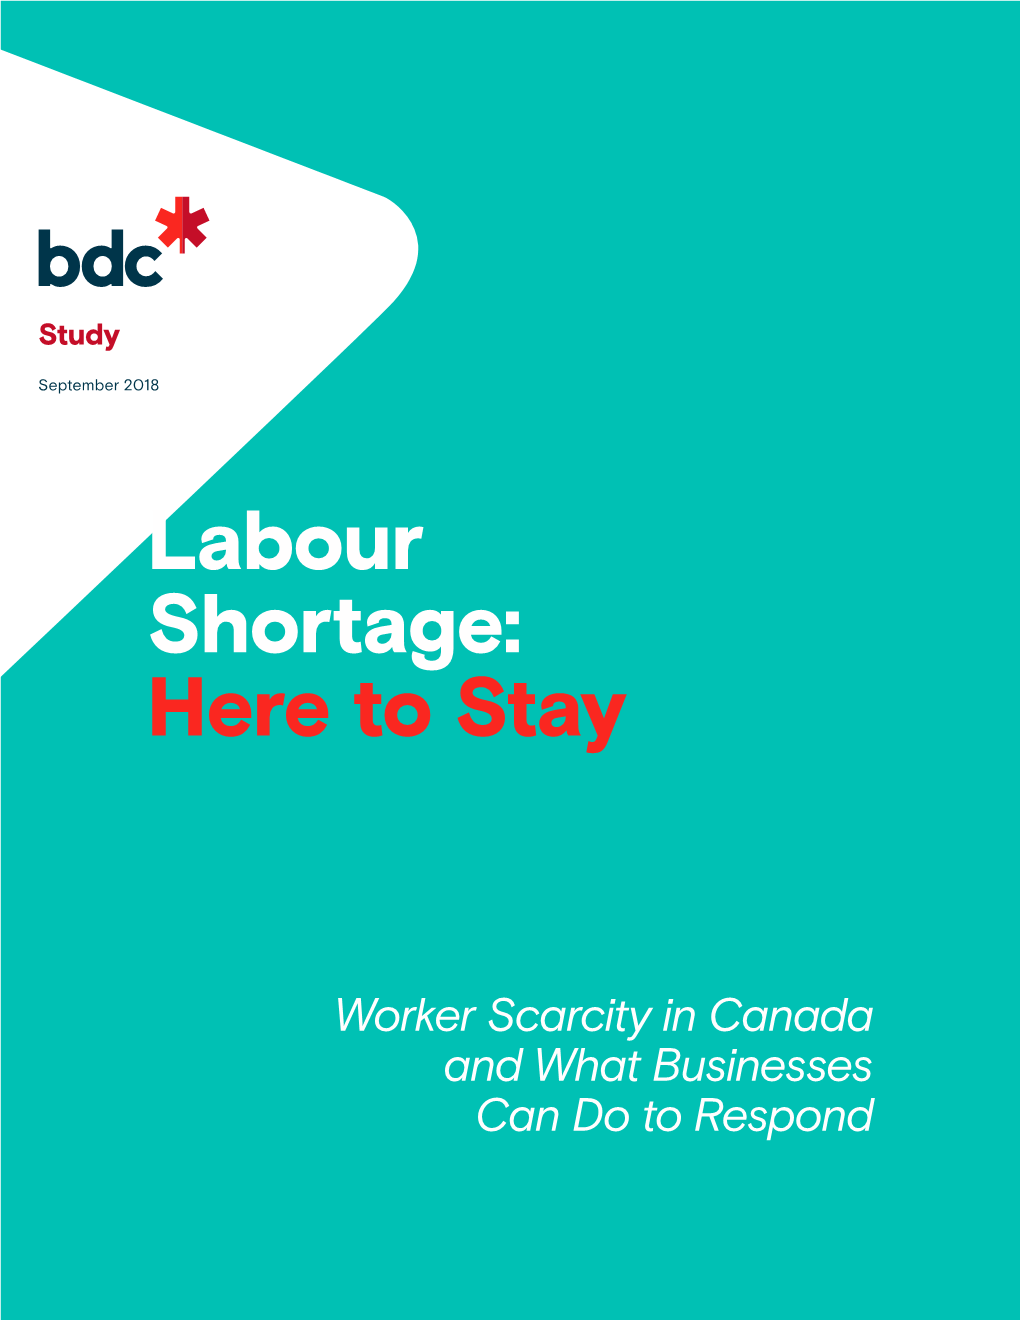 Labour Shortage in Canada: Here to Stay – Study